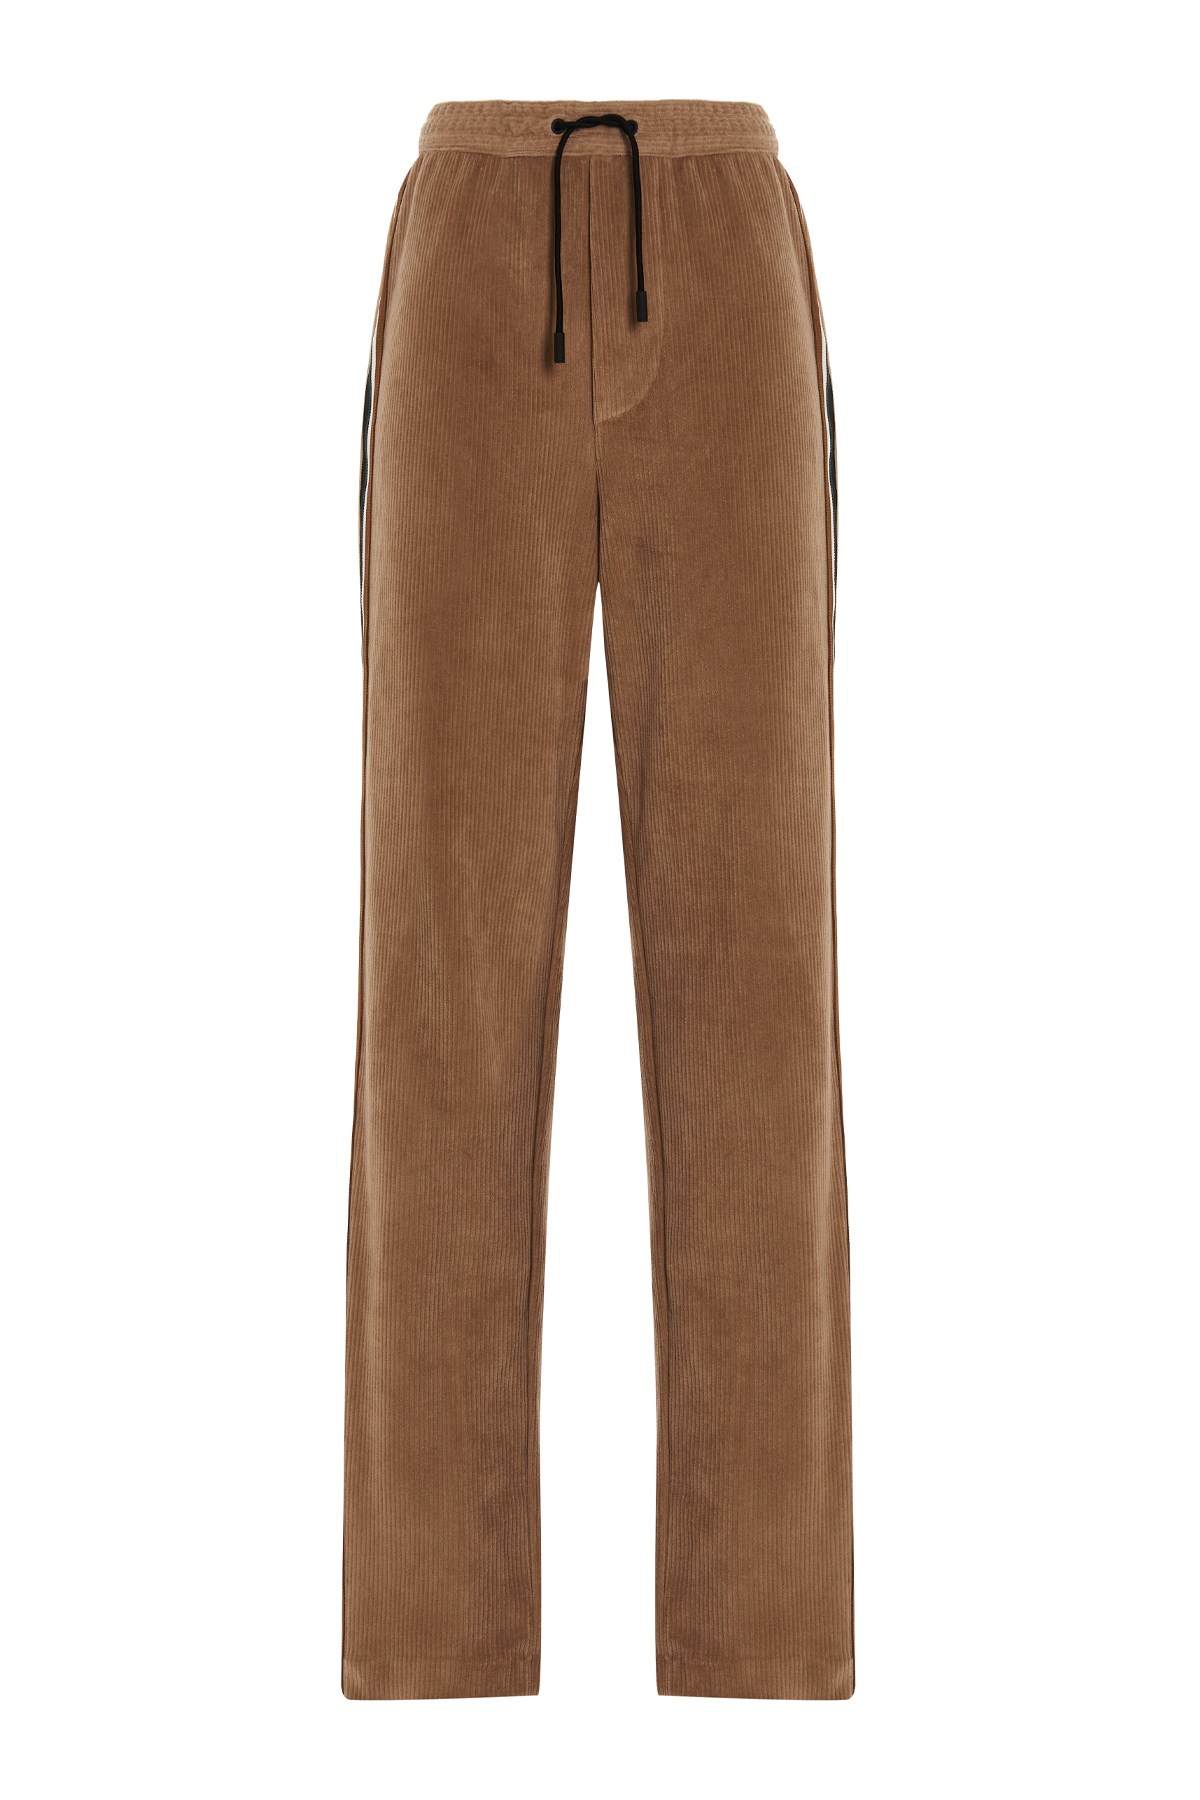 DSQUARED2 Corduroy Trousers